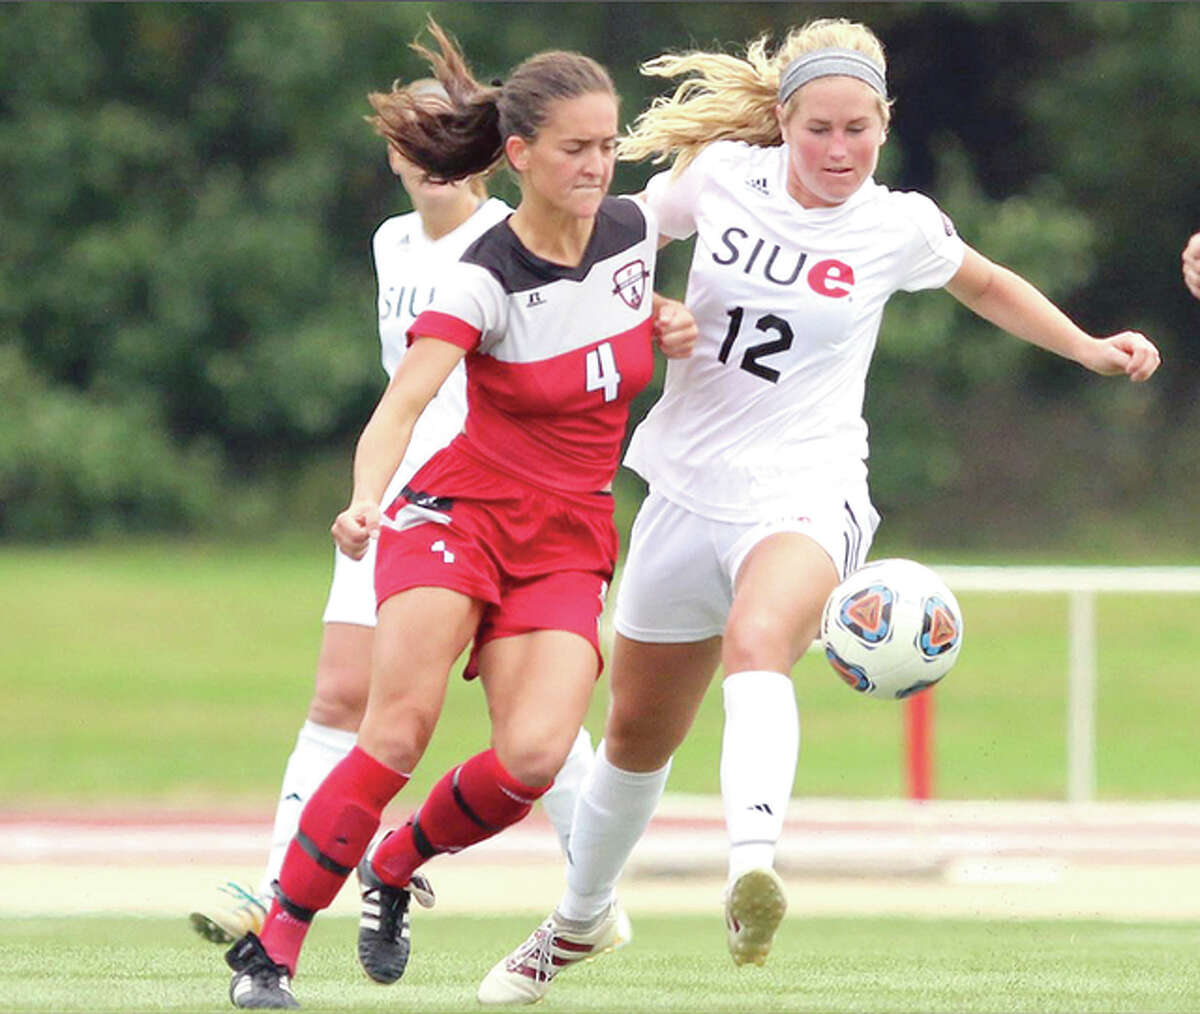 SIUE’s Lindsey Fencel (12) battles for the ball with Gina Fabbro of Austin Peay earlier this season. Fencel, a graduate of Civic Memorial High, scored the Cougars’ only goal in a 1-0 victory over Eastern Kentucky Sunday in the Ohio Valley Conference Tournament championship game. SIUE will play at No. 2 seed Notre Dame Friday in the NCAA Tournament.